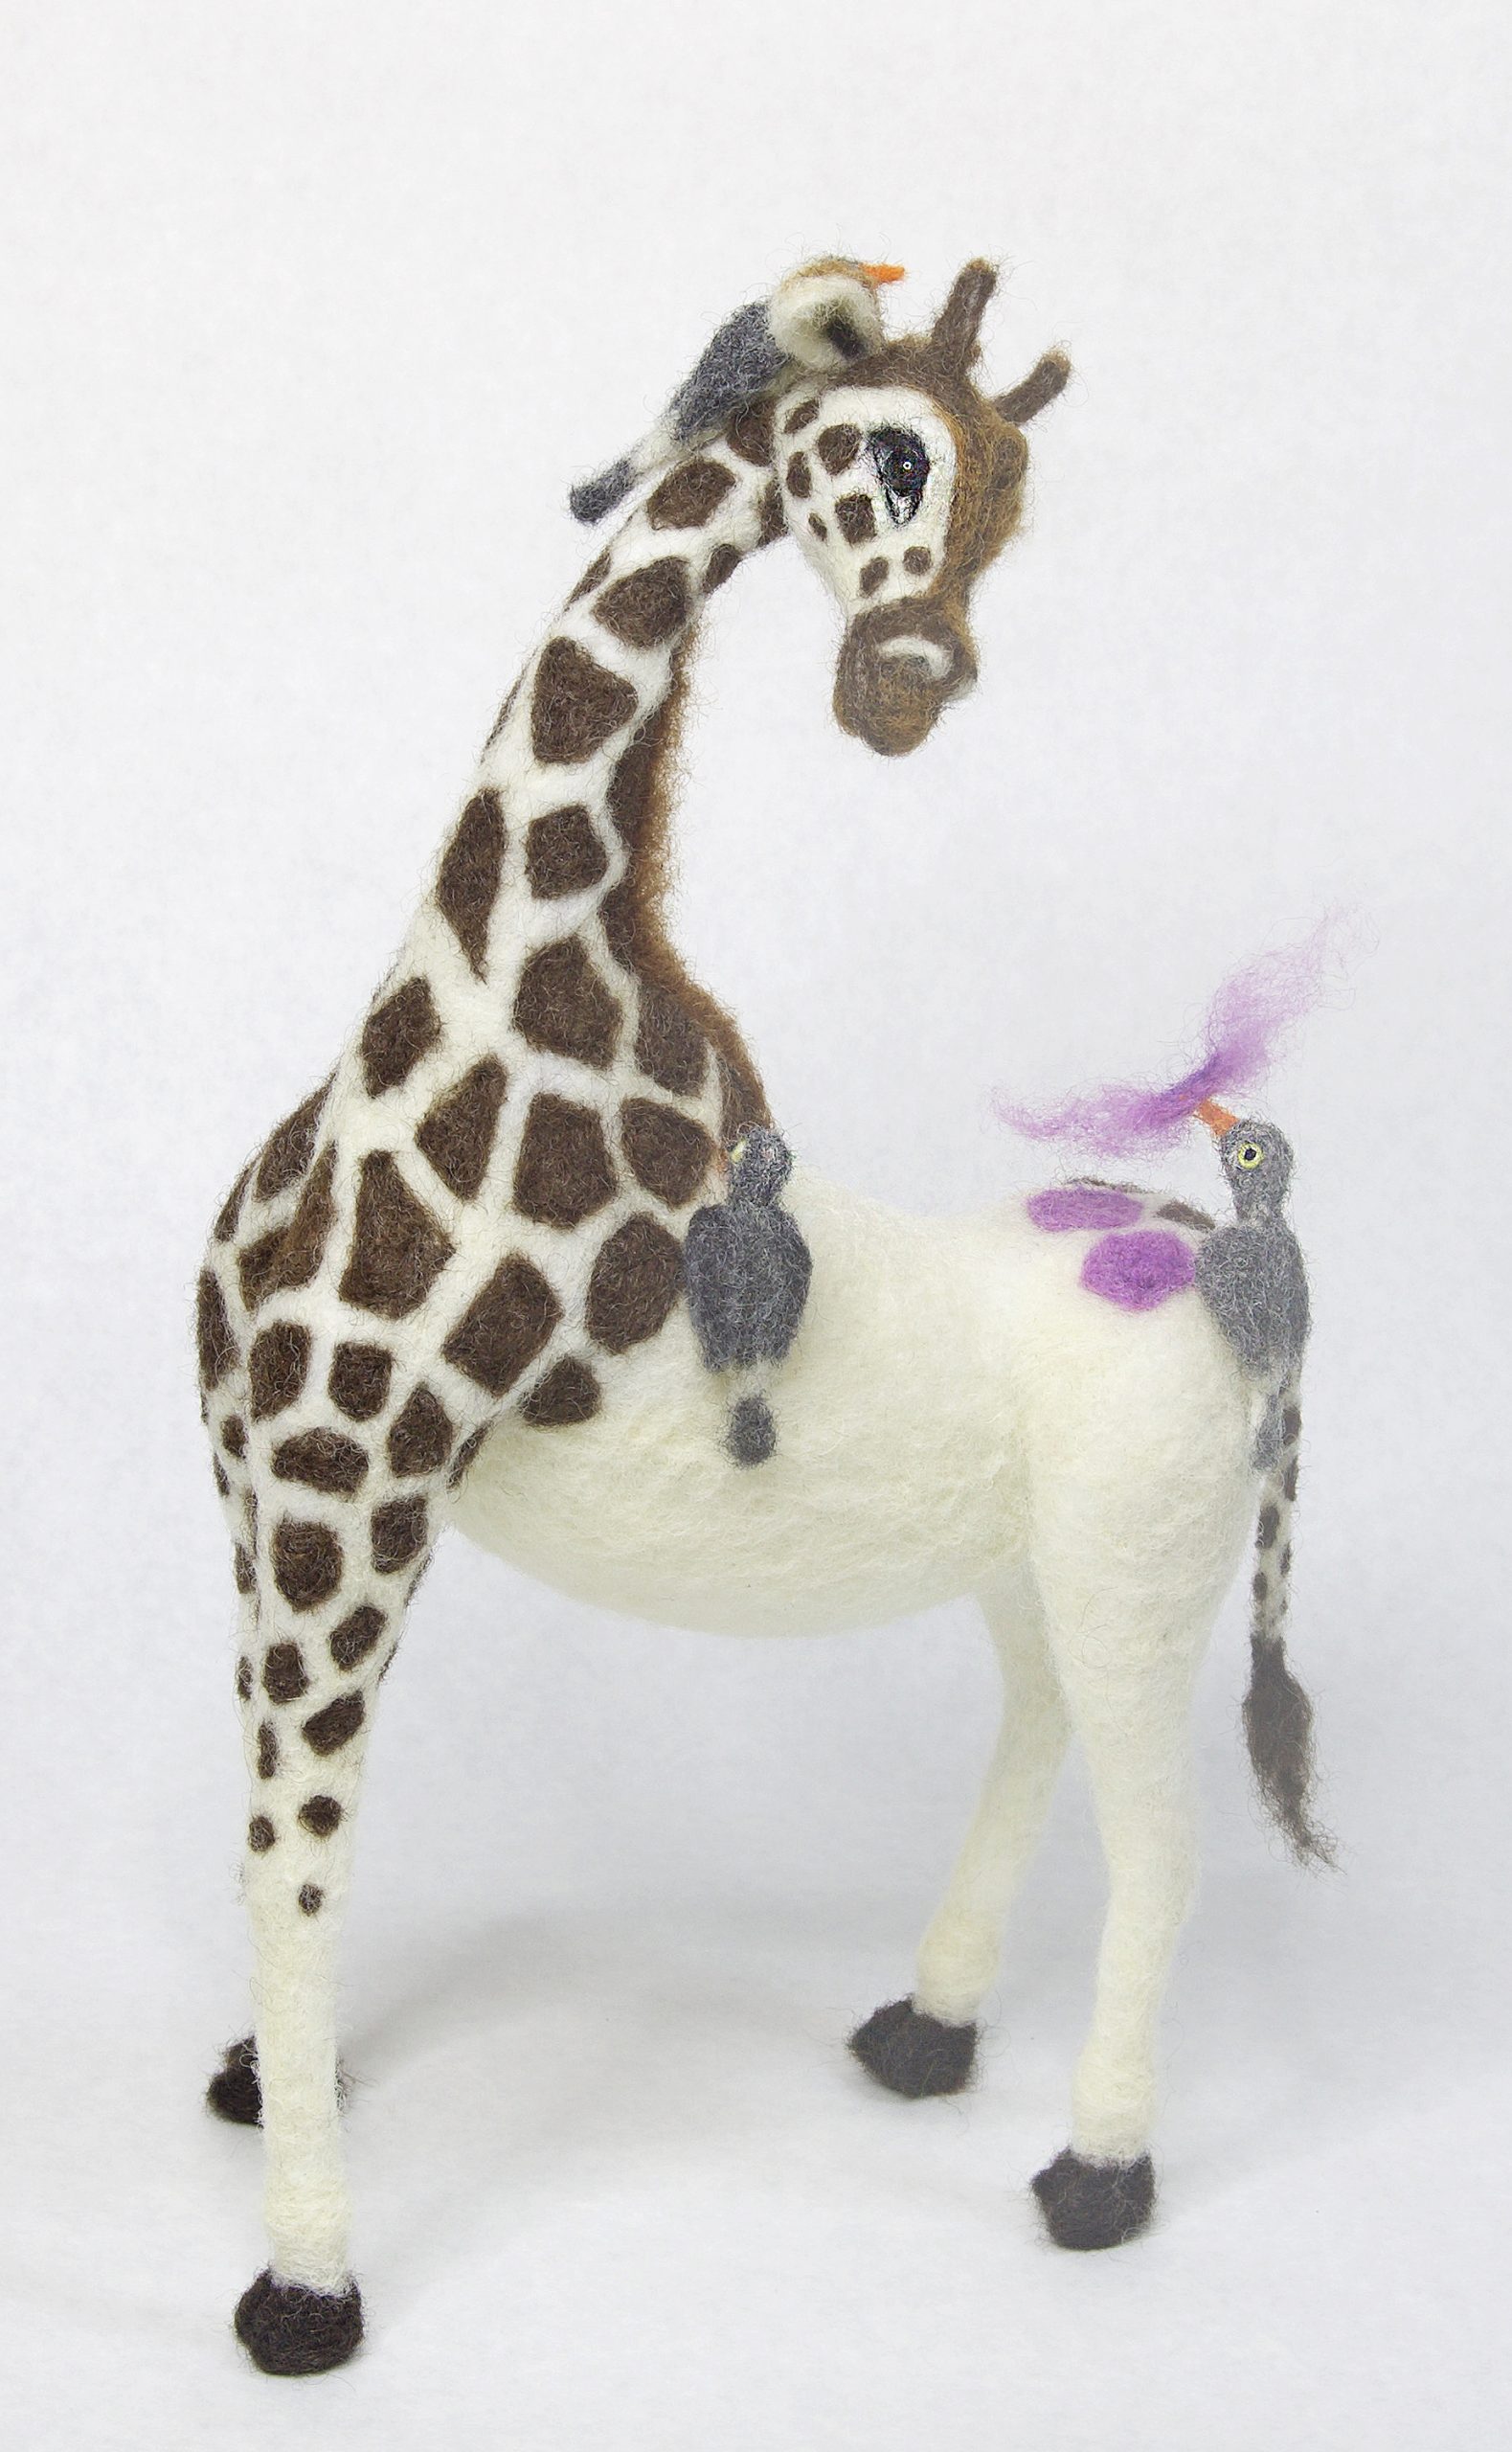 needle felted anthropomorphic giraffe sculpture with ox pecker birds and color surprise bling